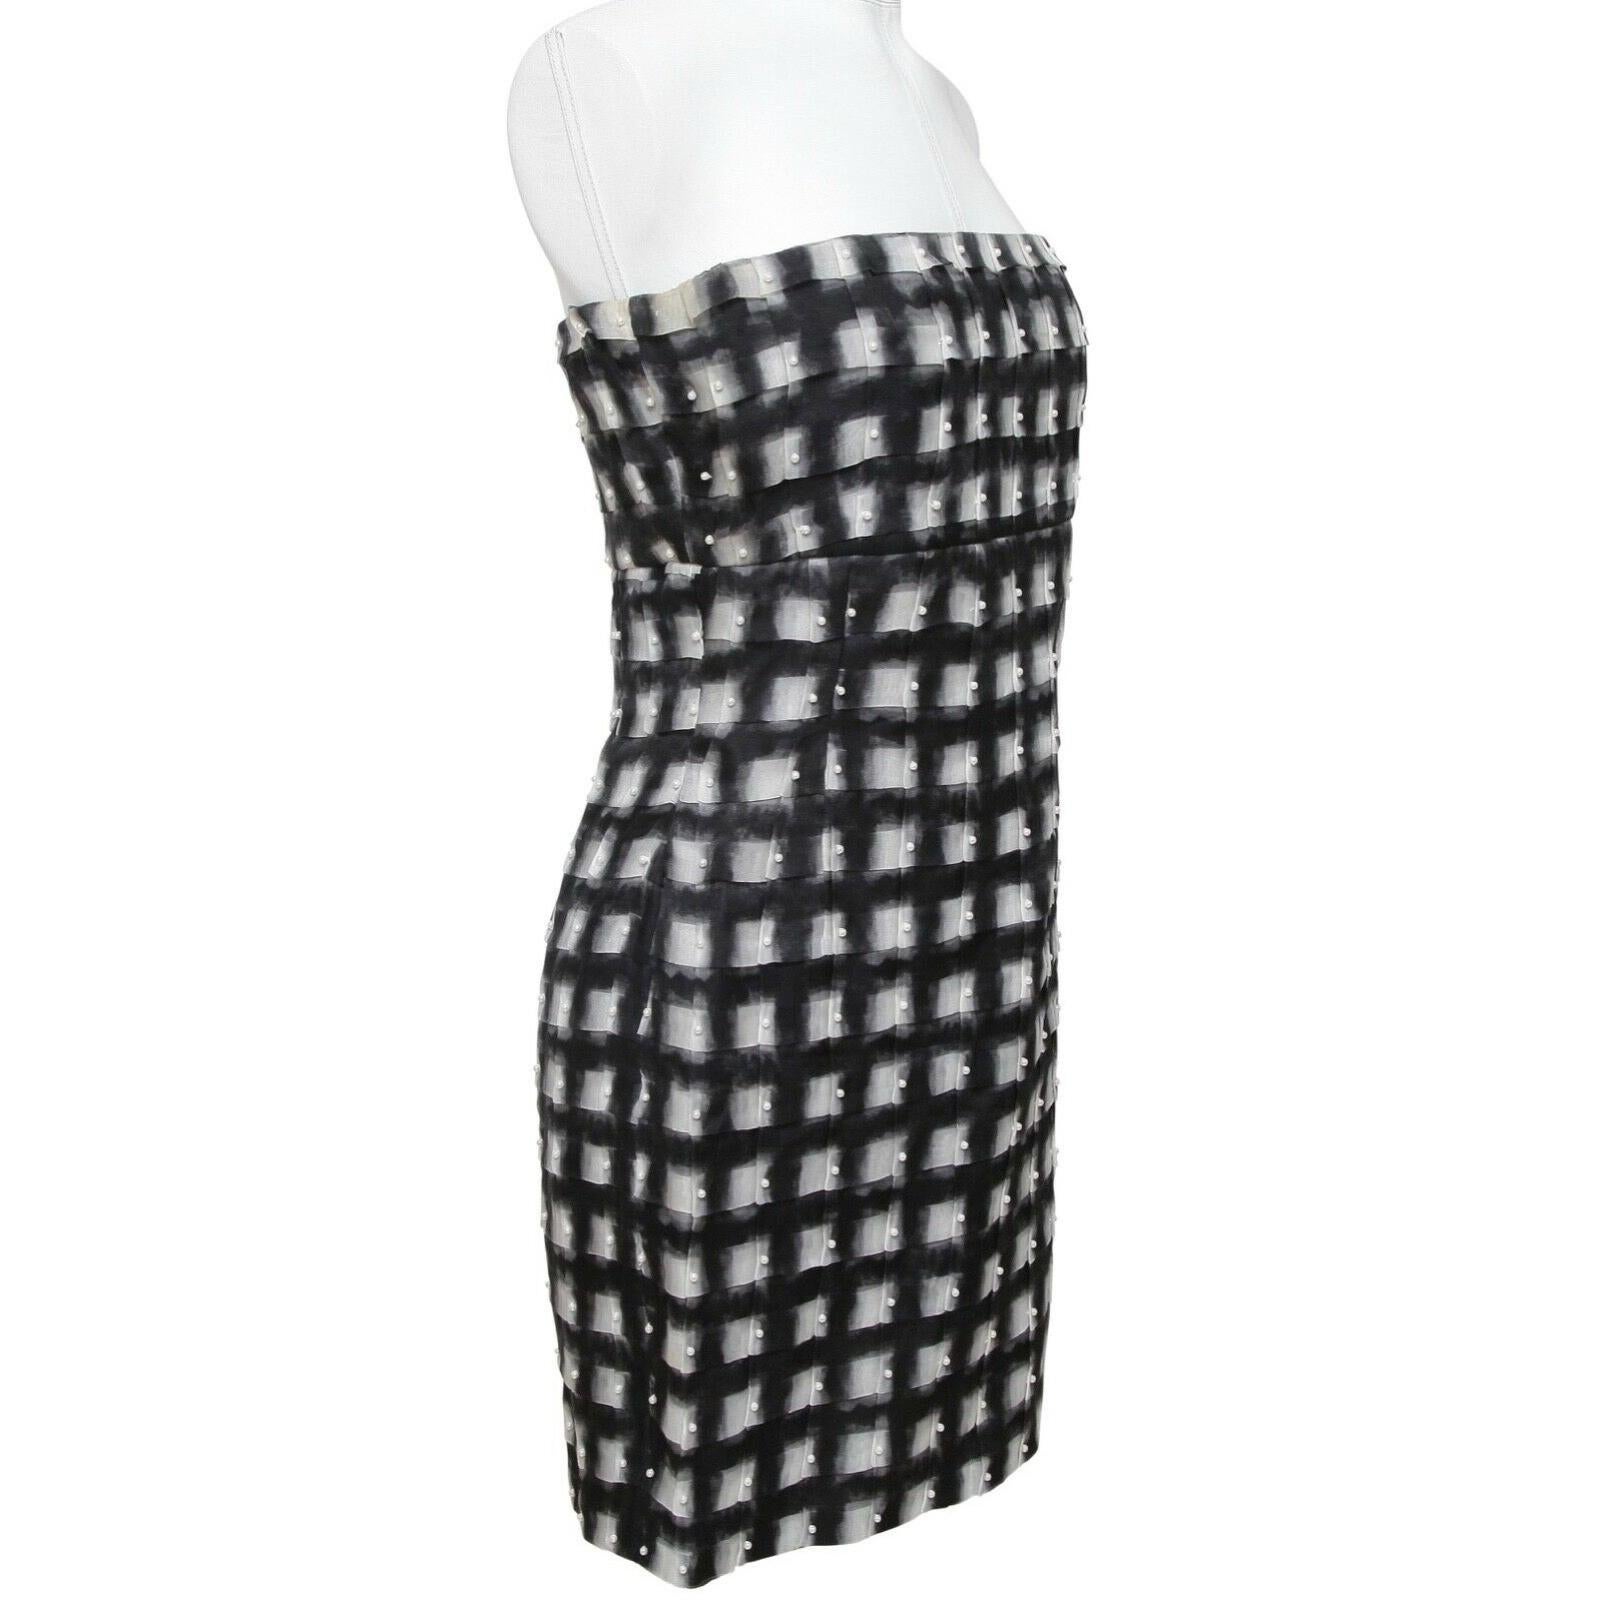 GUARANTEED AUTHENTIC CHANEL SPRING 2013 RUNWAY PEARL EMBELLISHED STRAPLESS DRESS
THIS LOOK IS EFFORTLESS + CHIC!

Retail excluding sales taxes approximately $6,000


Design:
- Stunning black and white checkered strapless dress with pearl